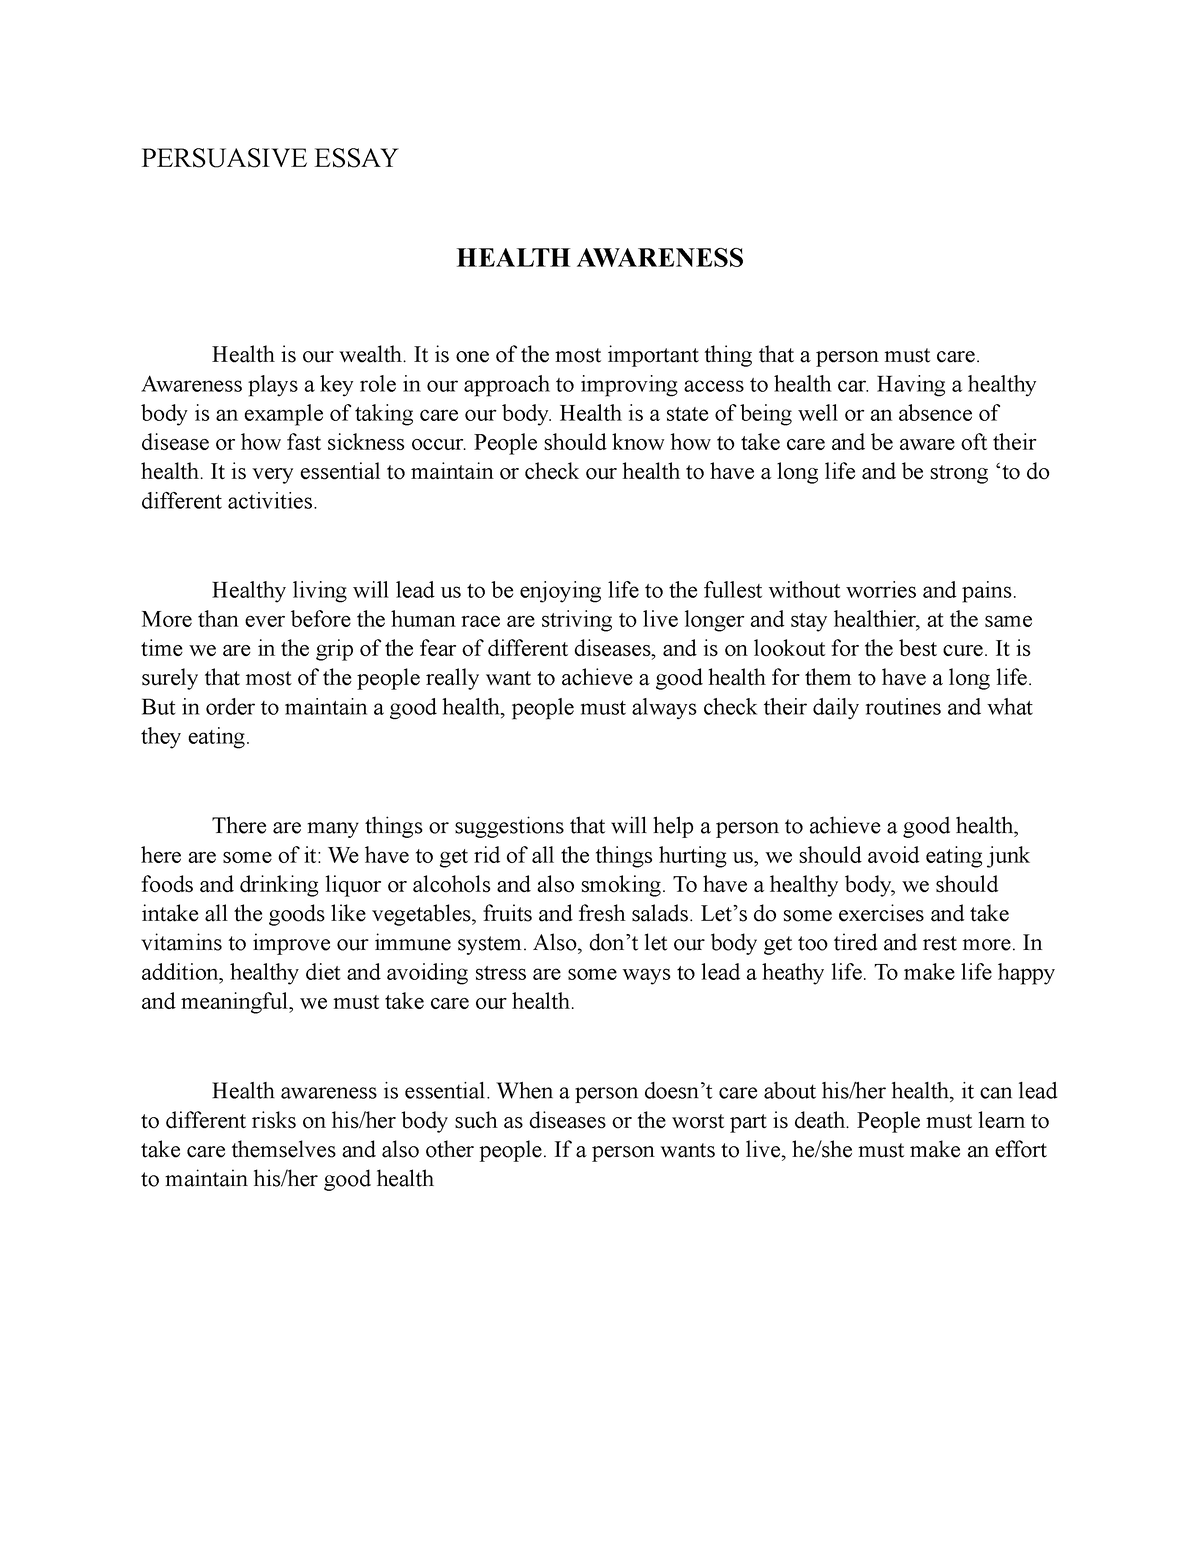 persuasive essay about health awareness